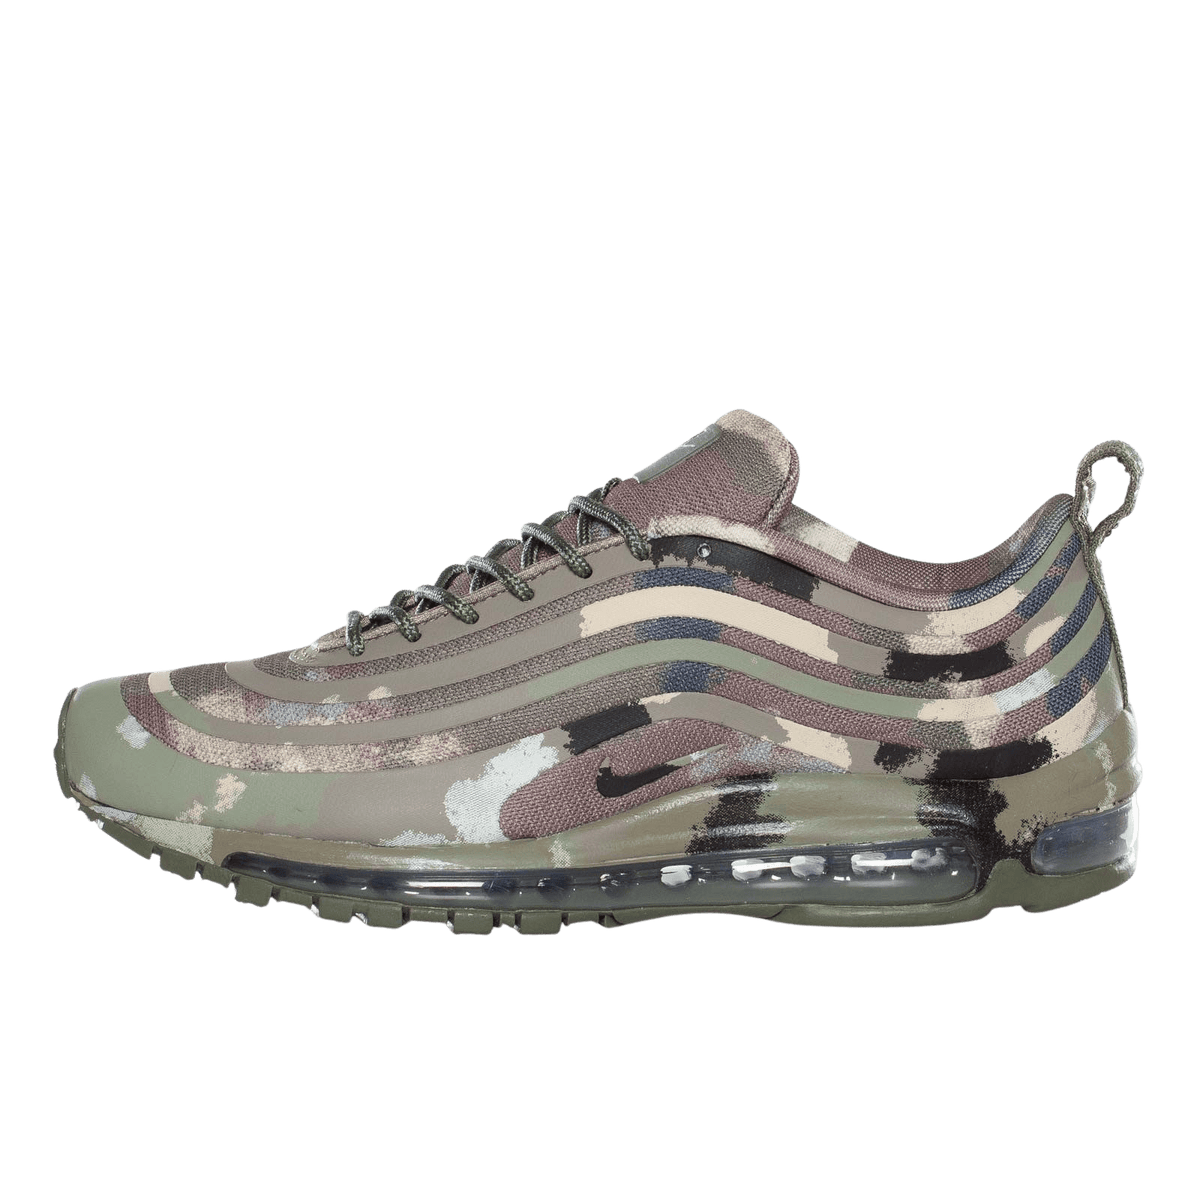 NIKE AIR MAX '97 SP 'ITALY' - CerbeShops